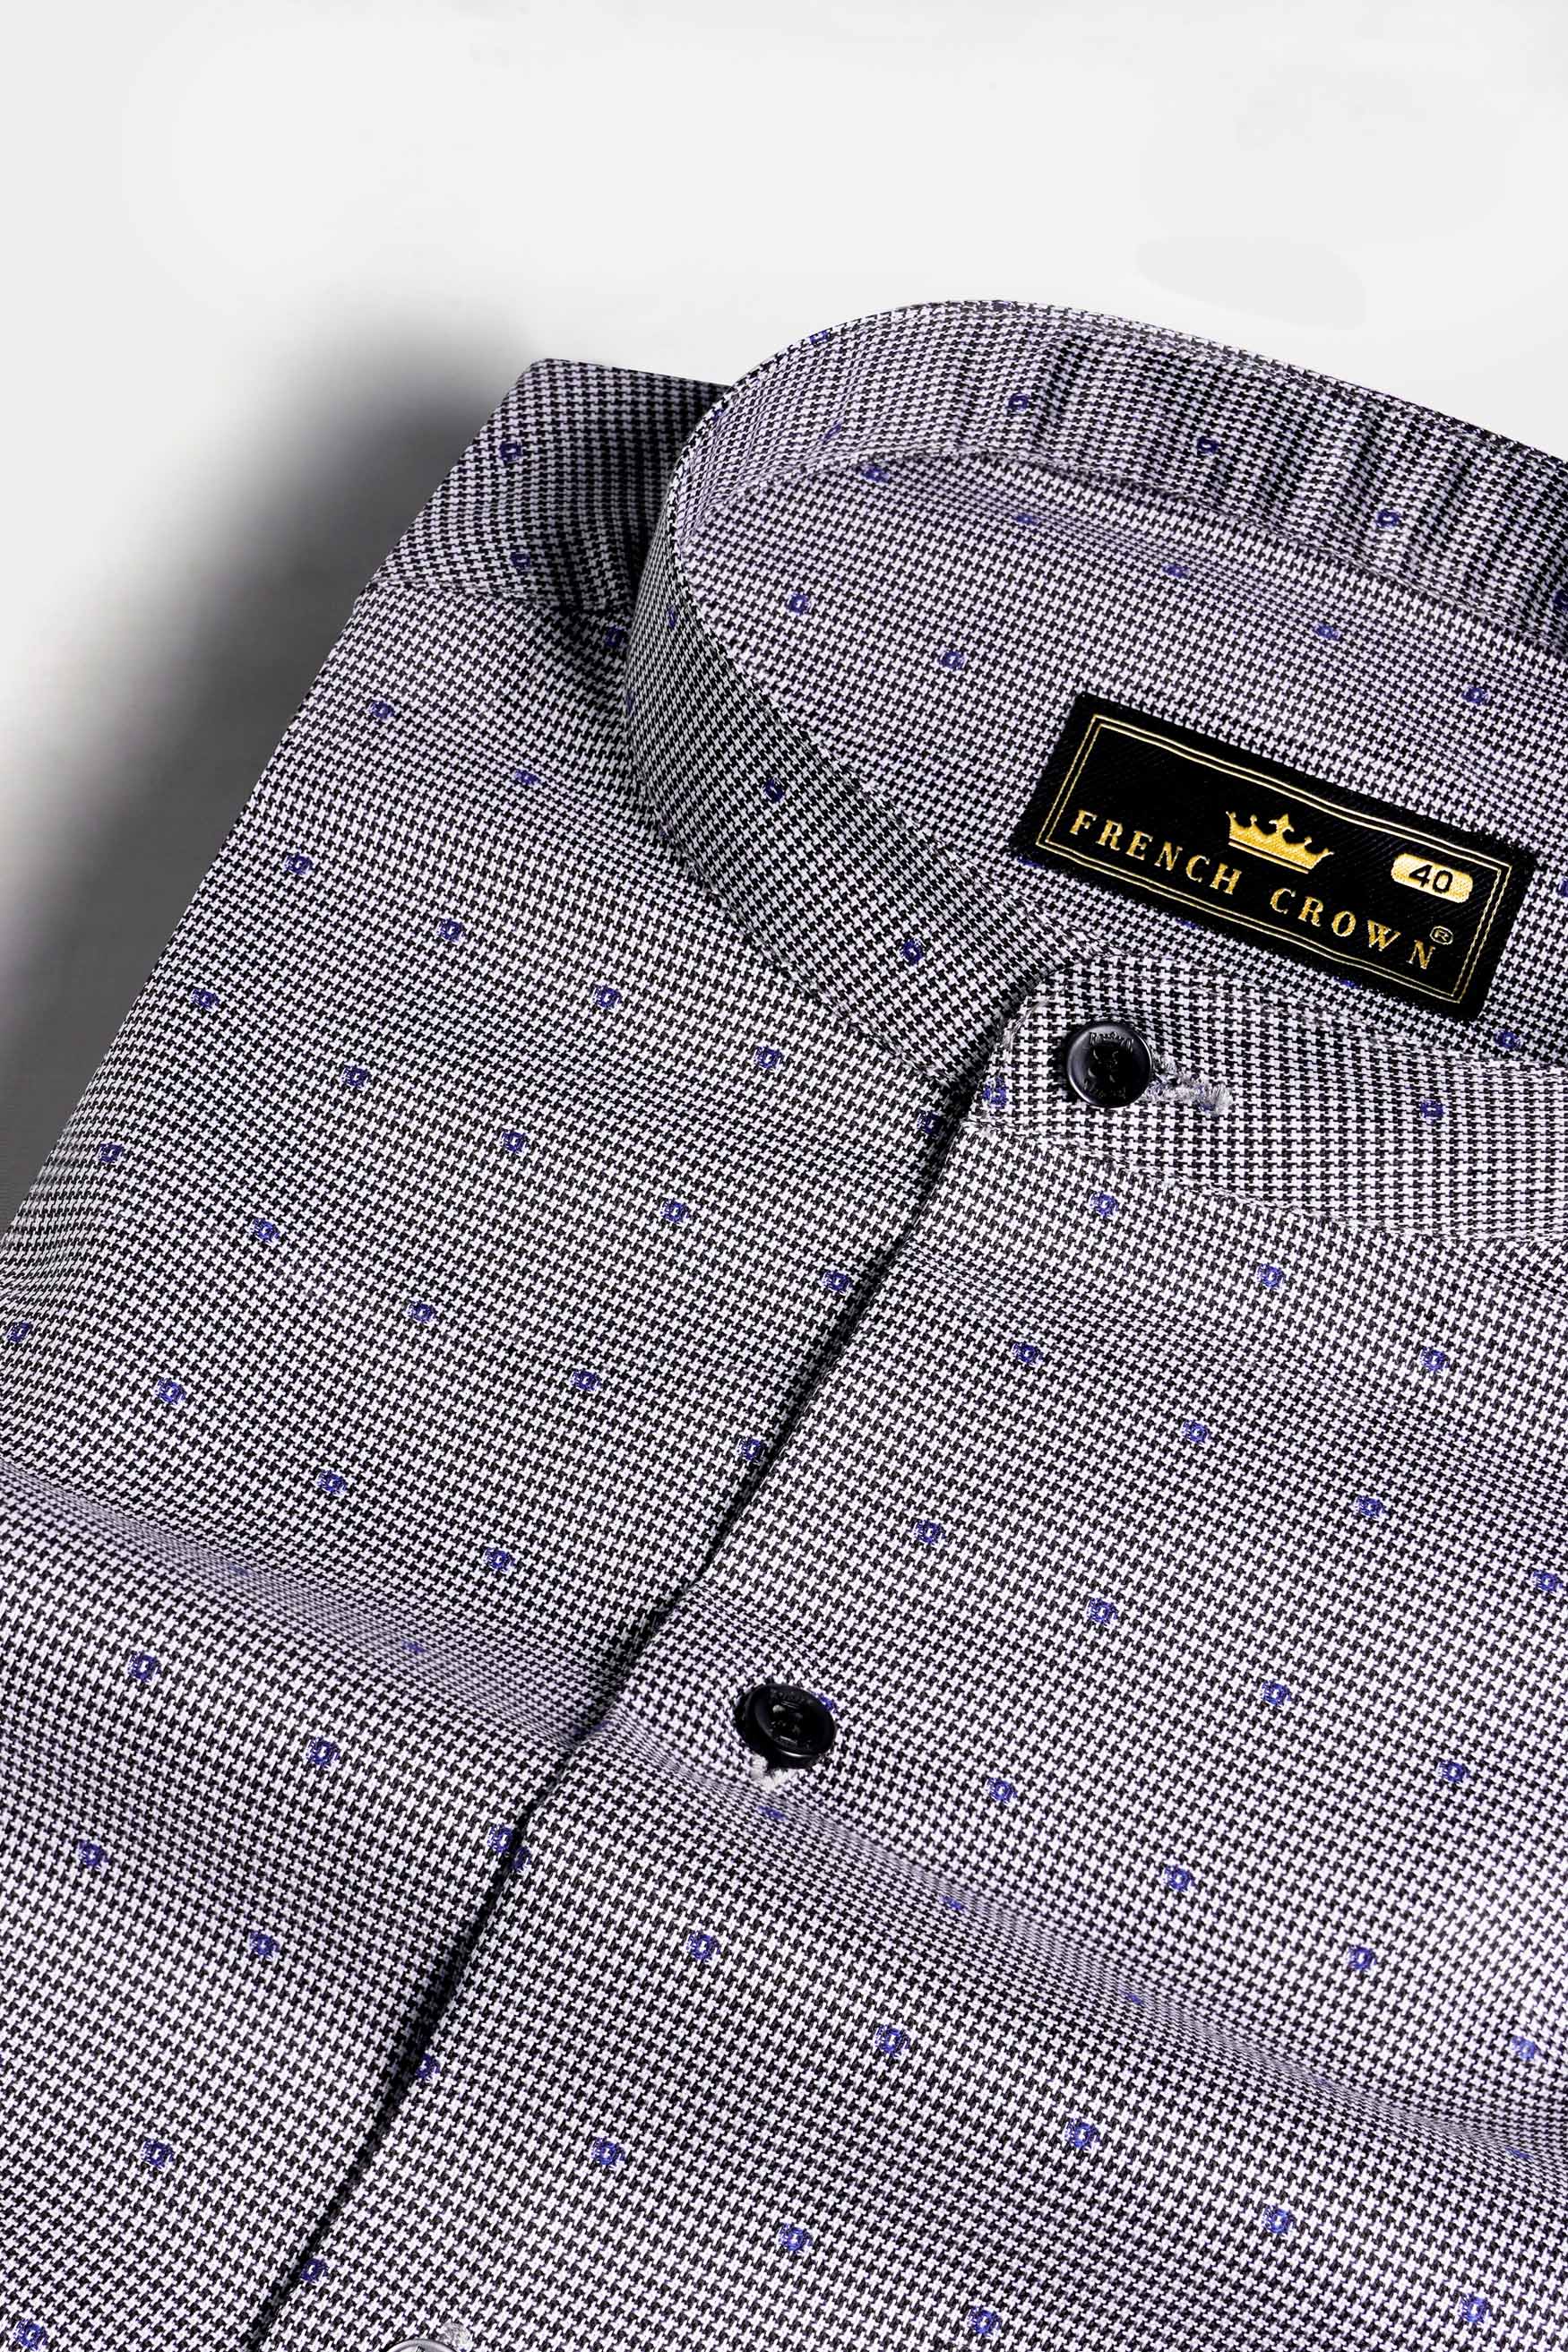 Concord Gray and Scampi Blue Houndstooth Textured Premium Giza Cotton Shirt